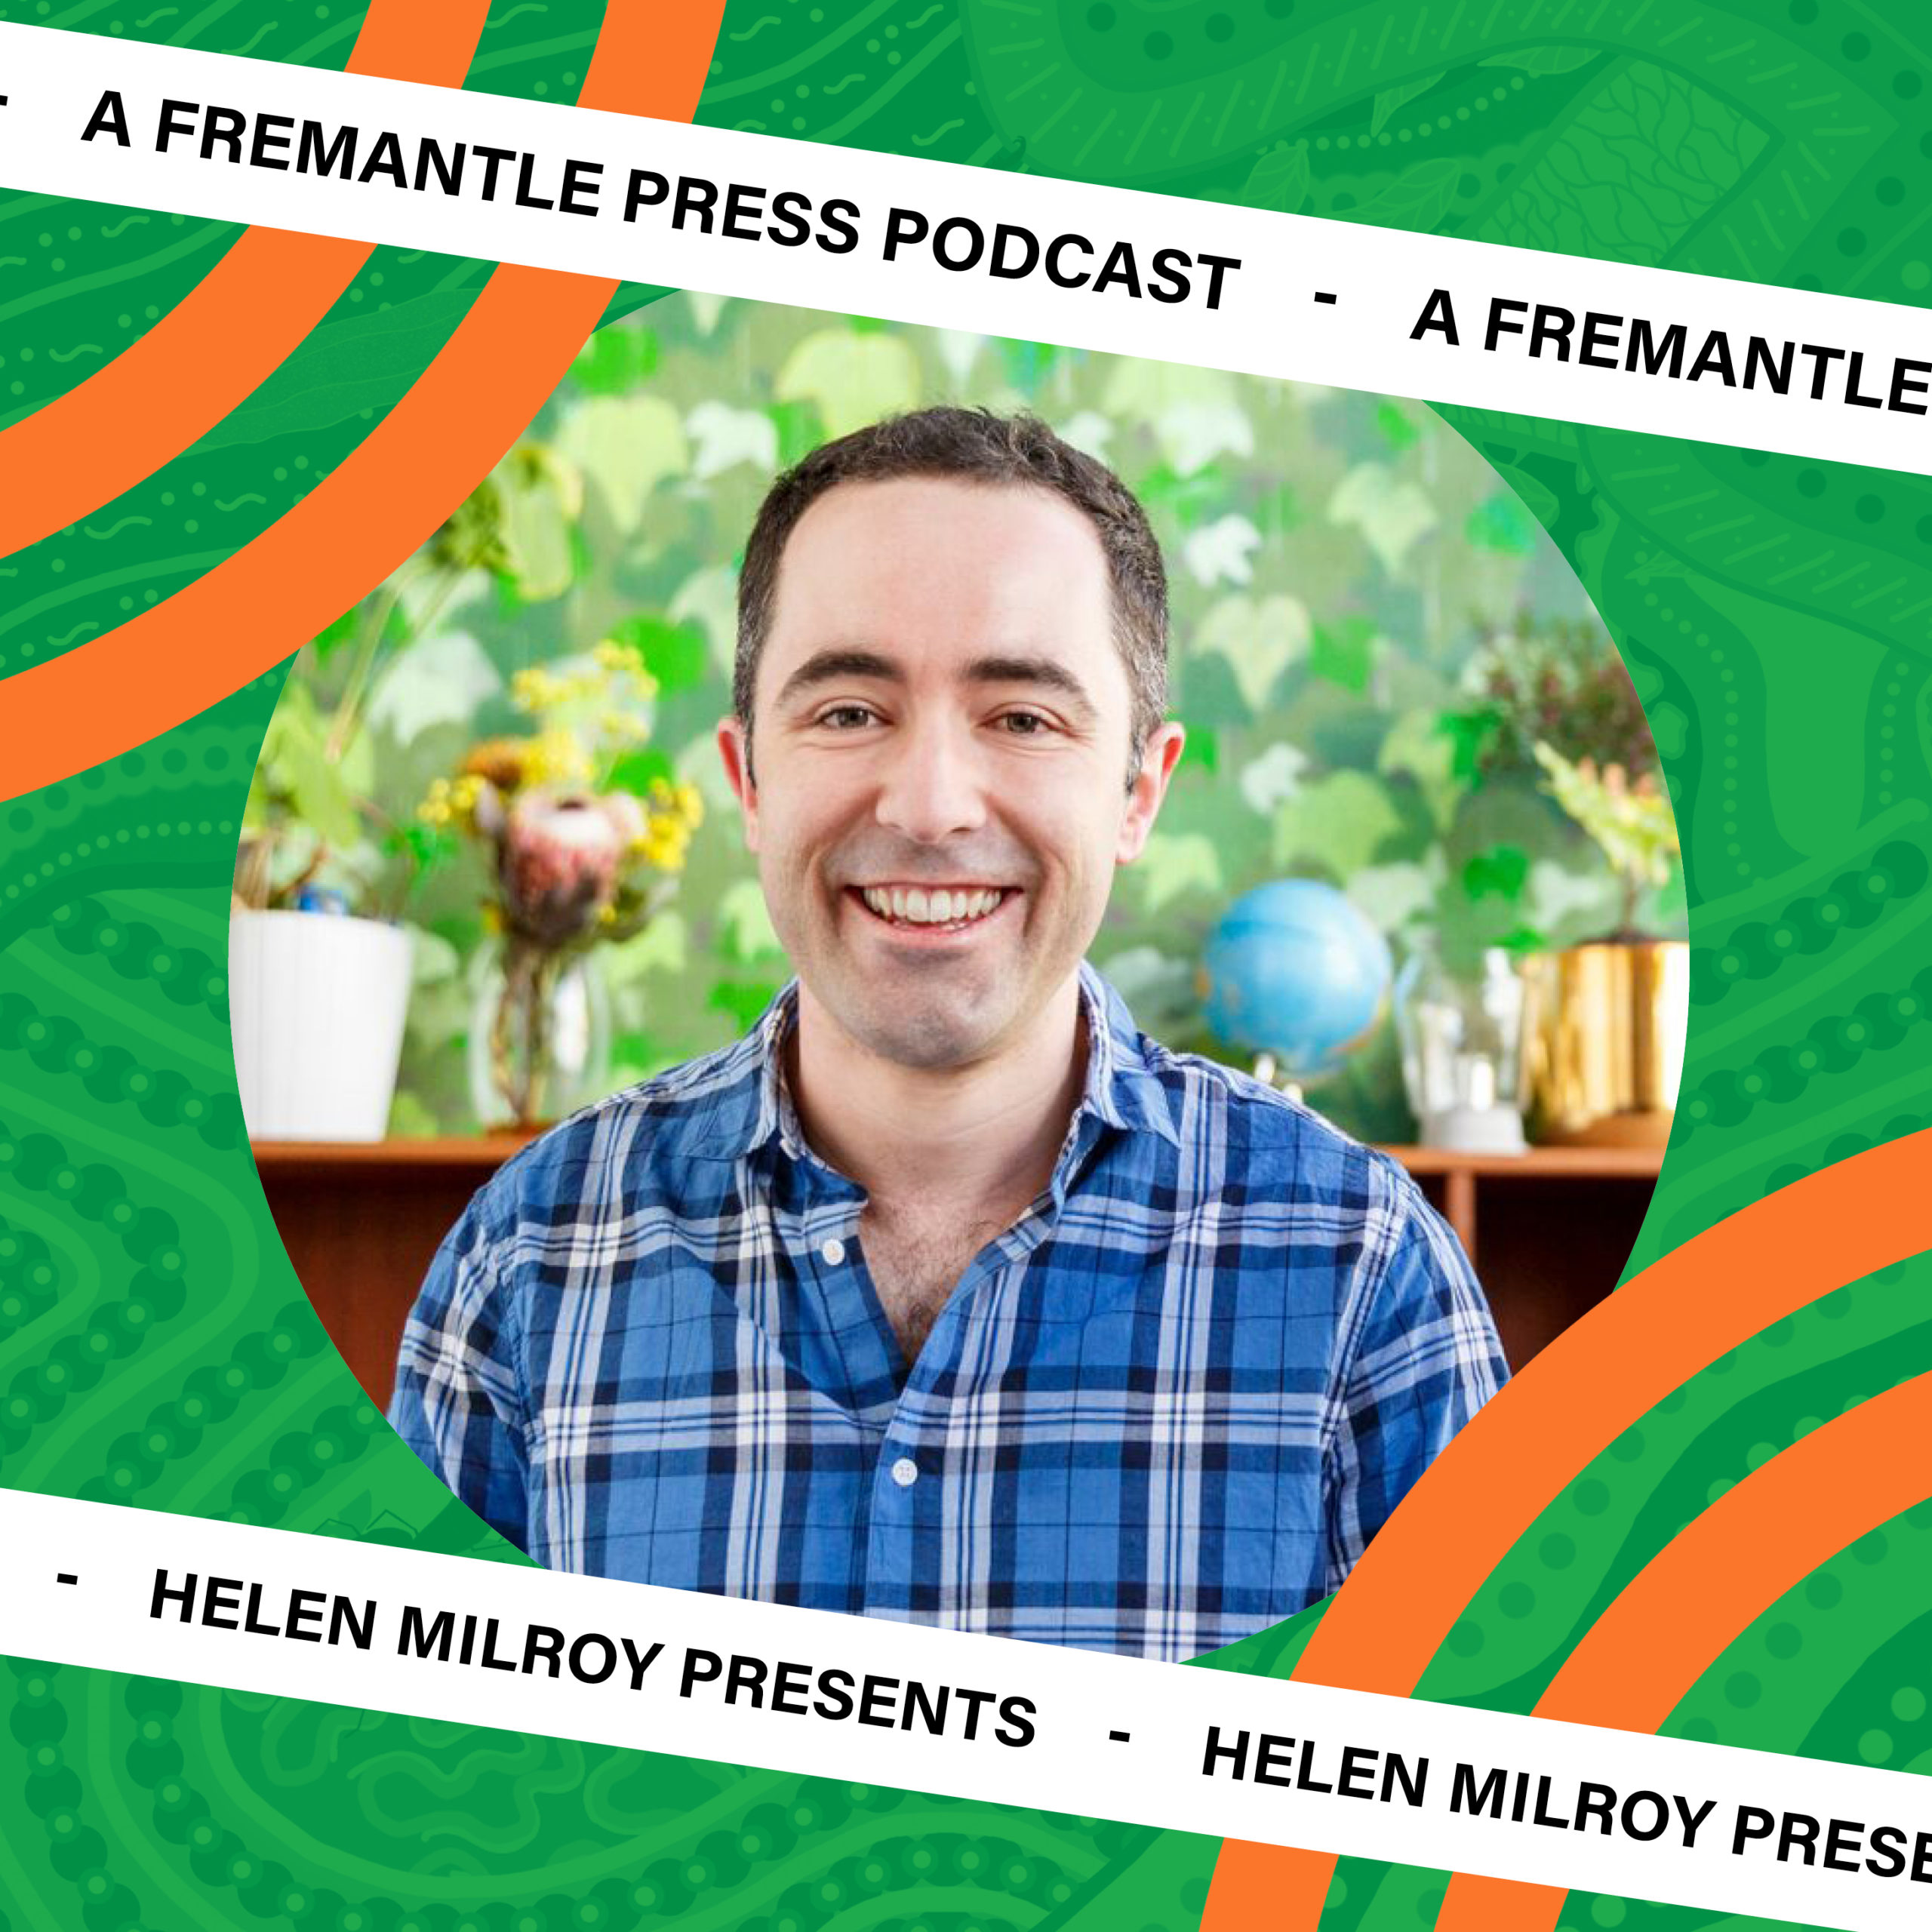 Helen Milroy presents: Stellarphant creator James Foley discusses how he made the leap from day job to full-time author